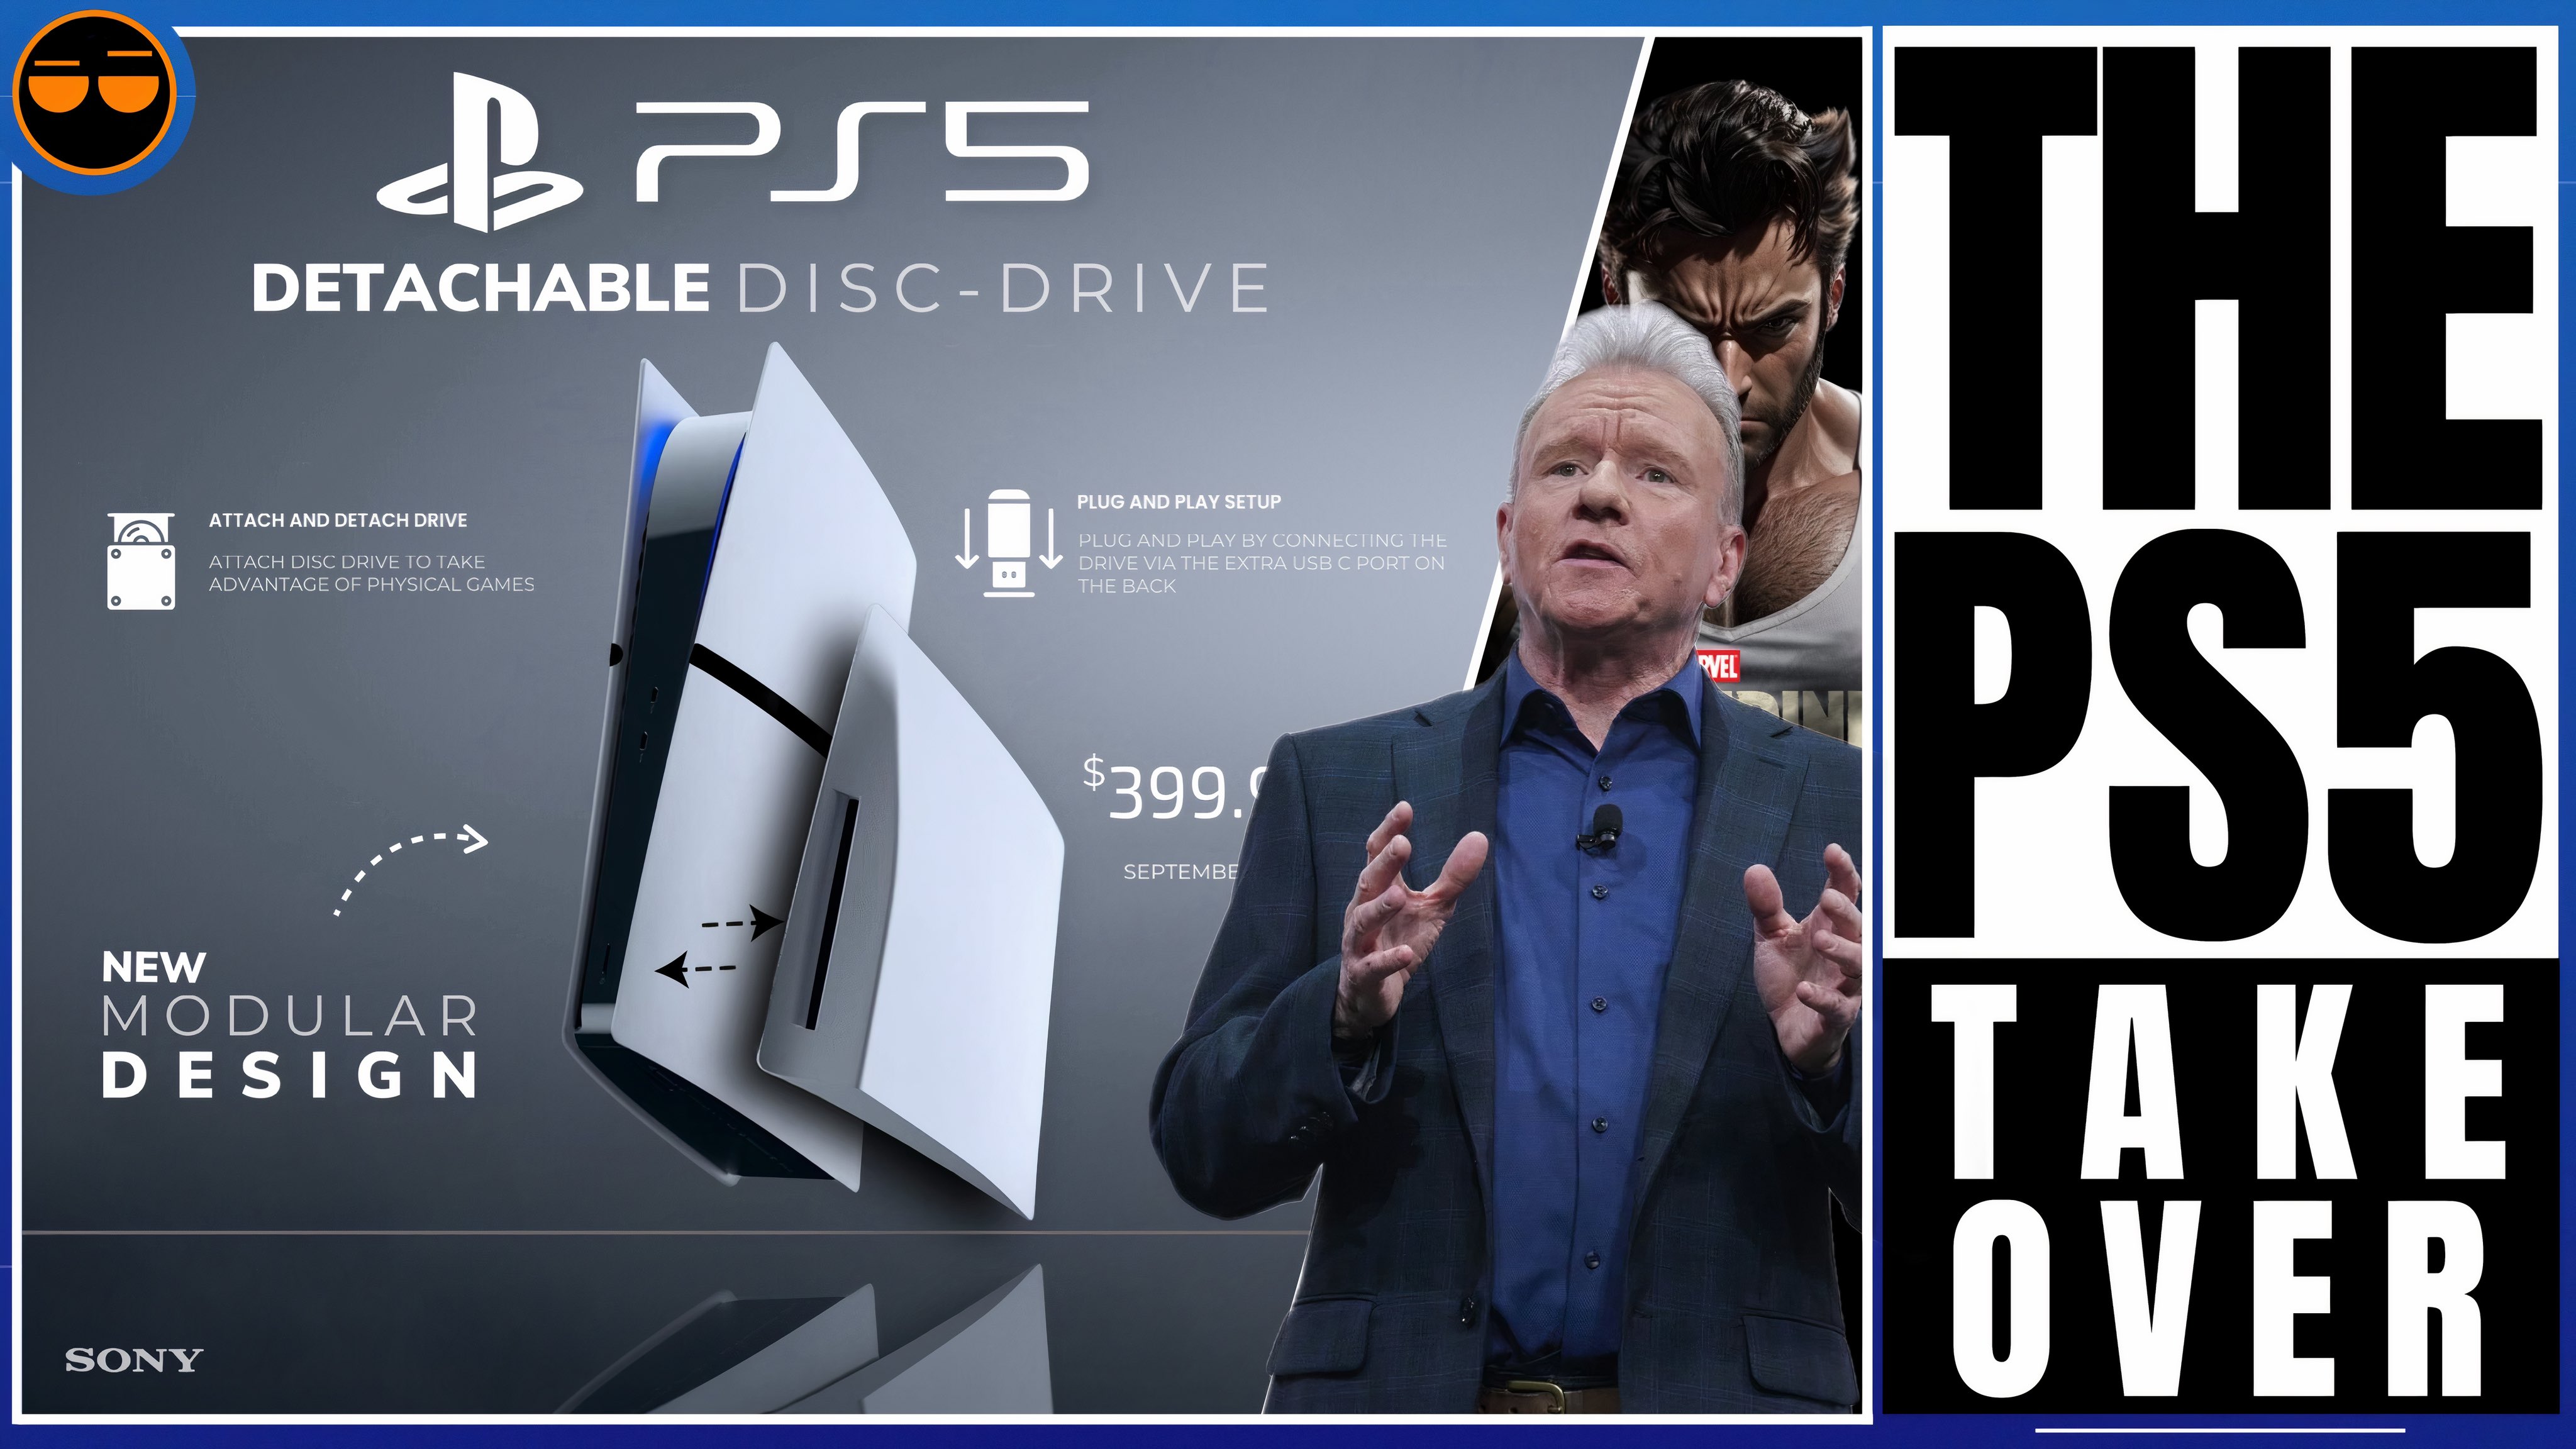 TCMFGames on X: Sony X Batman Deal, PS5 Slim and it's potential  announcement and reveal and Sony confirms their next generation console  again thanks to recent news! Check this one out 